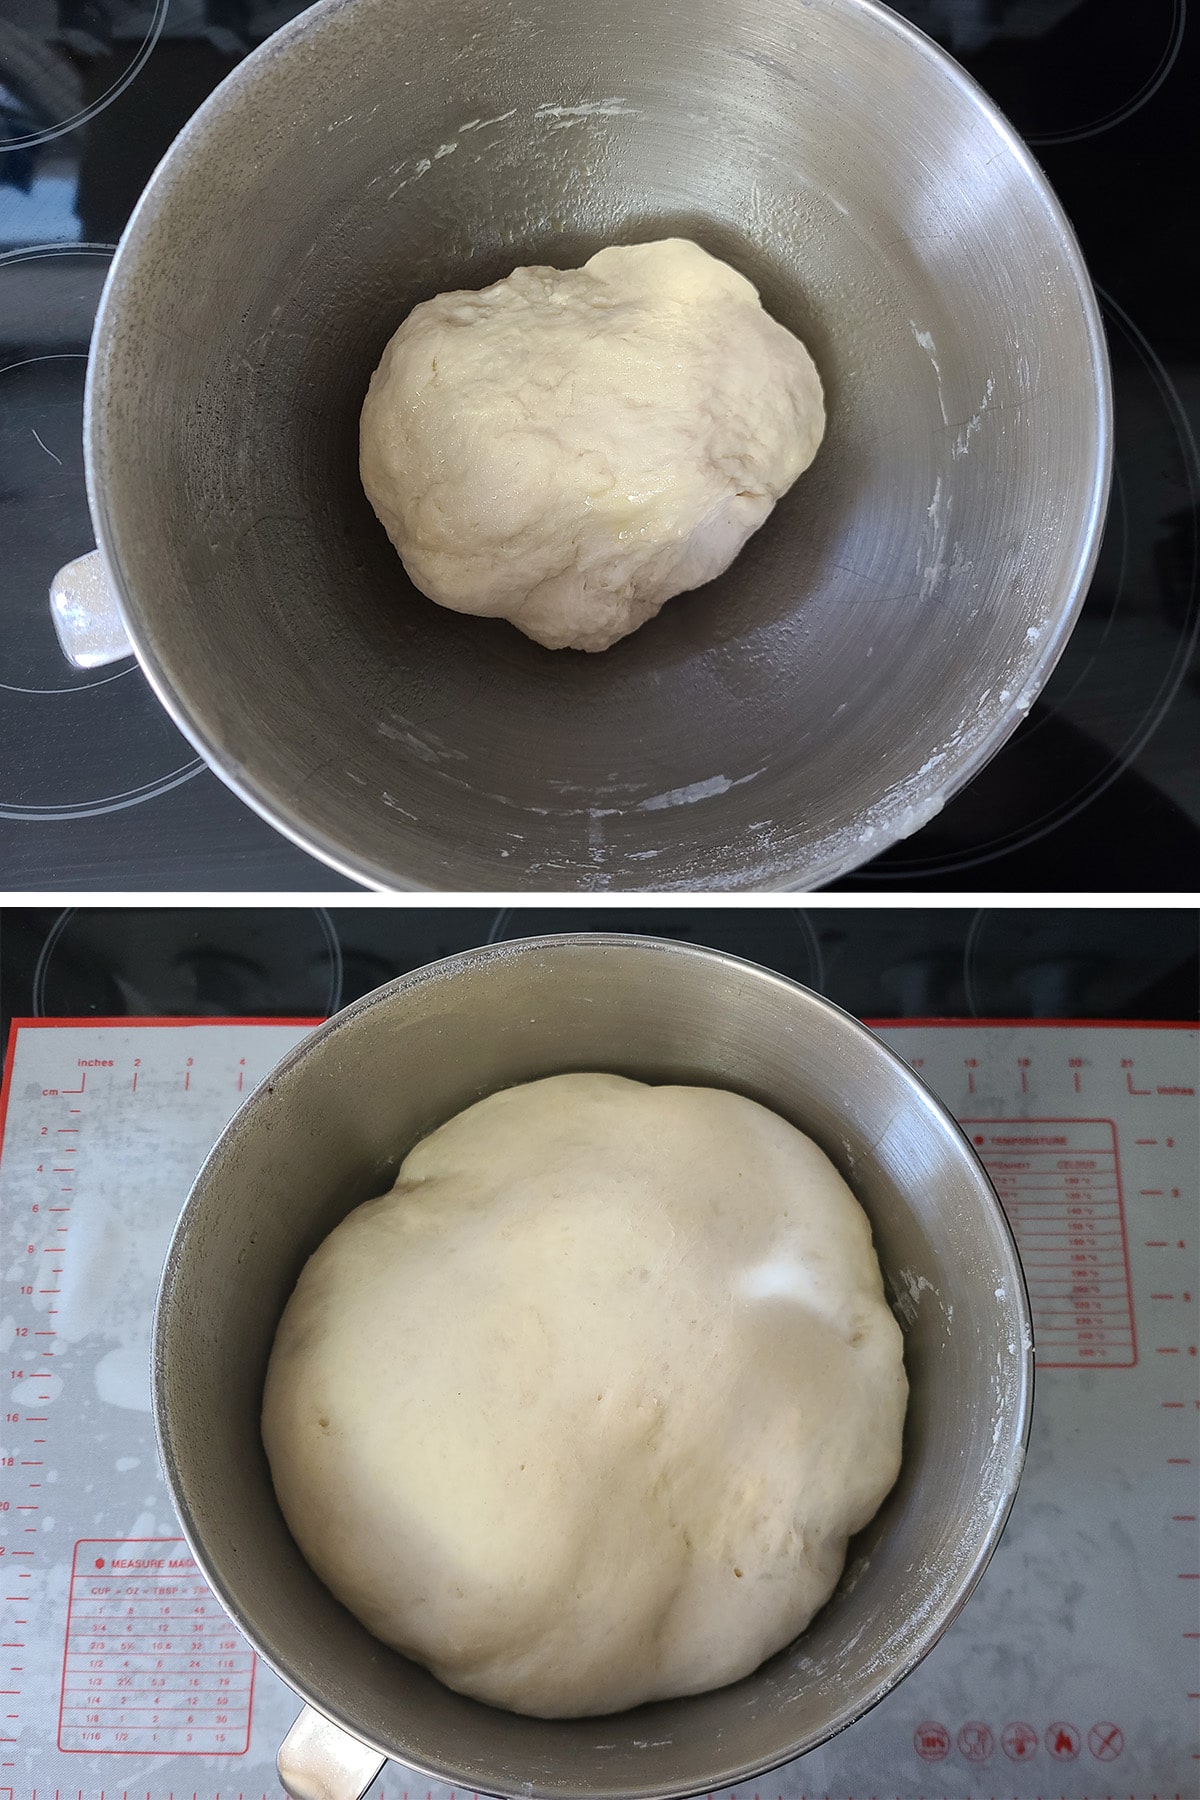 A ball of dough in a metal bowl, before and after rising.